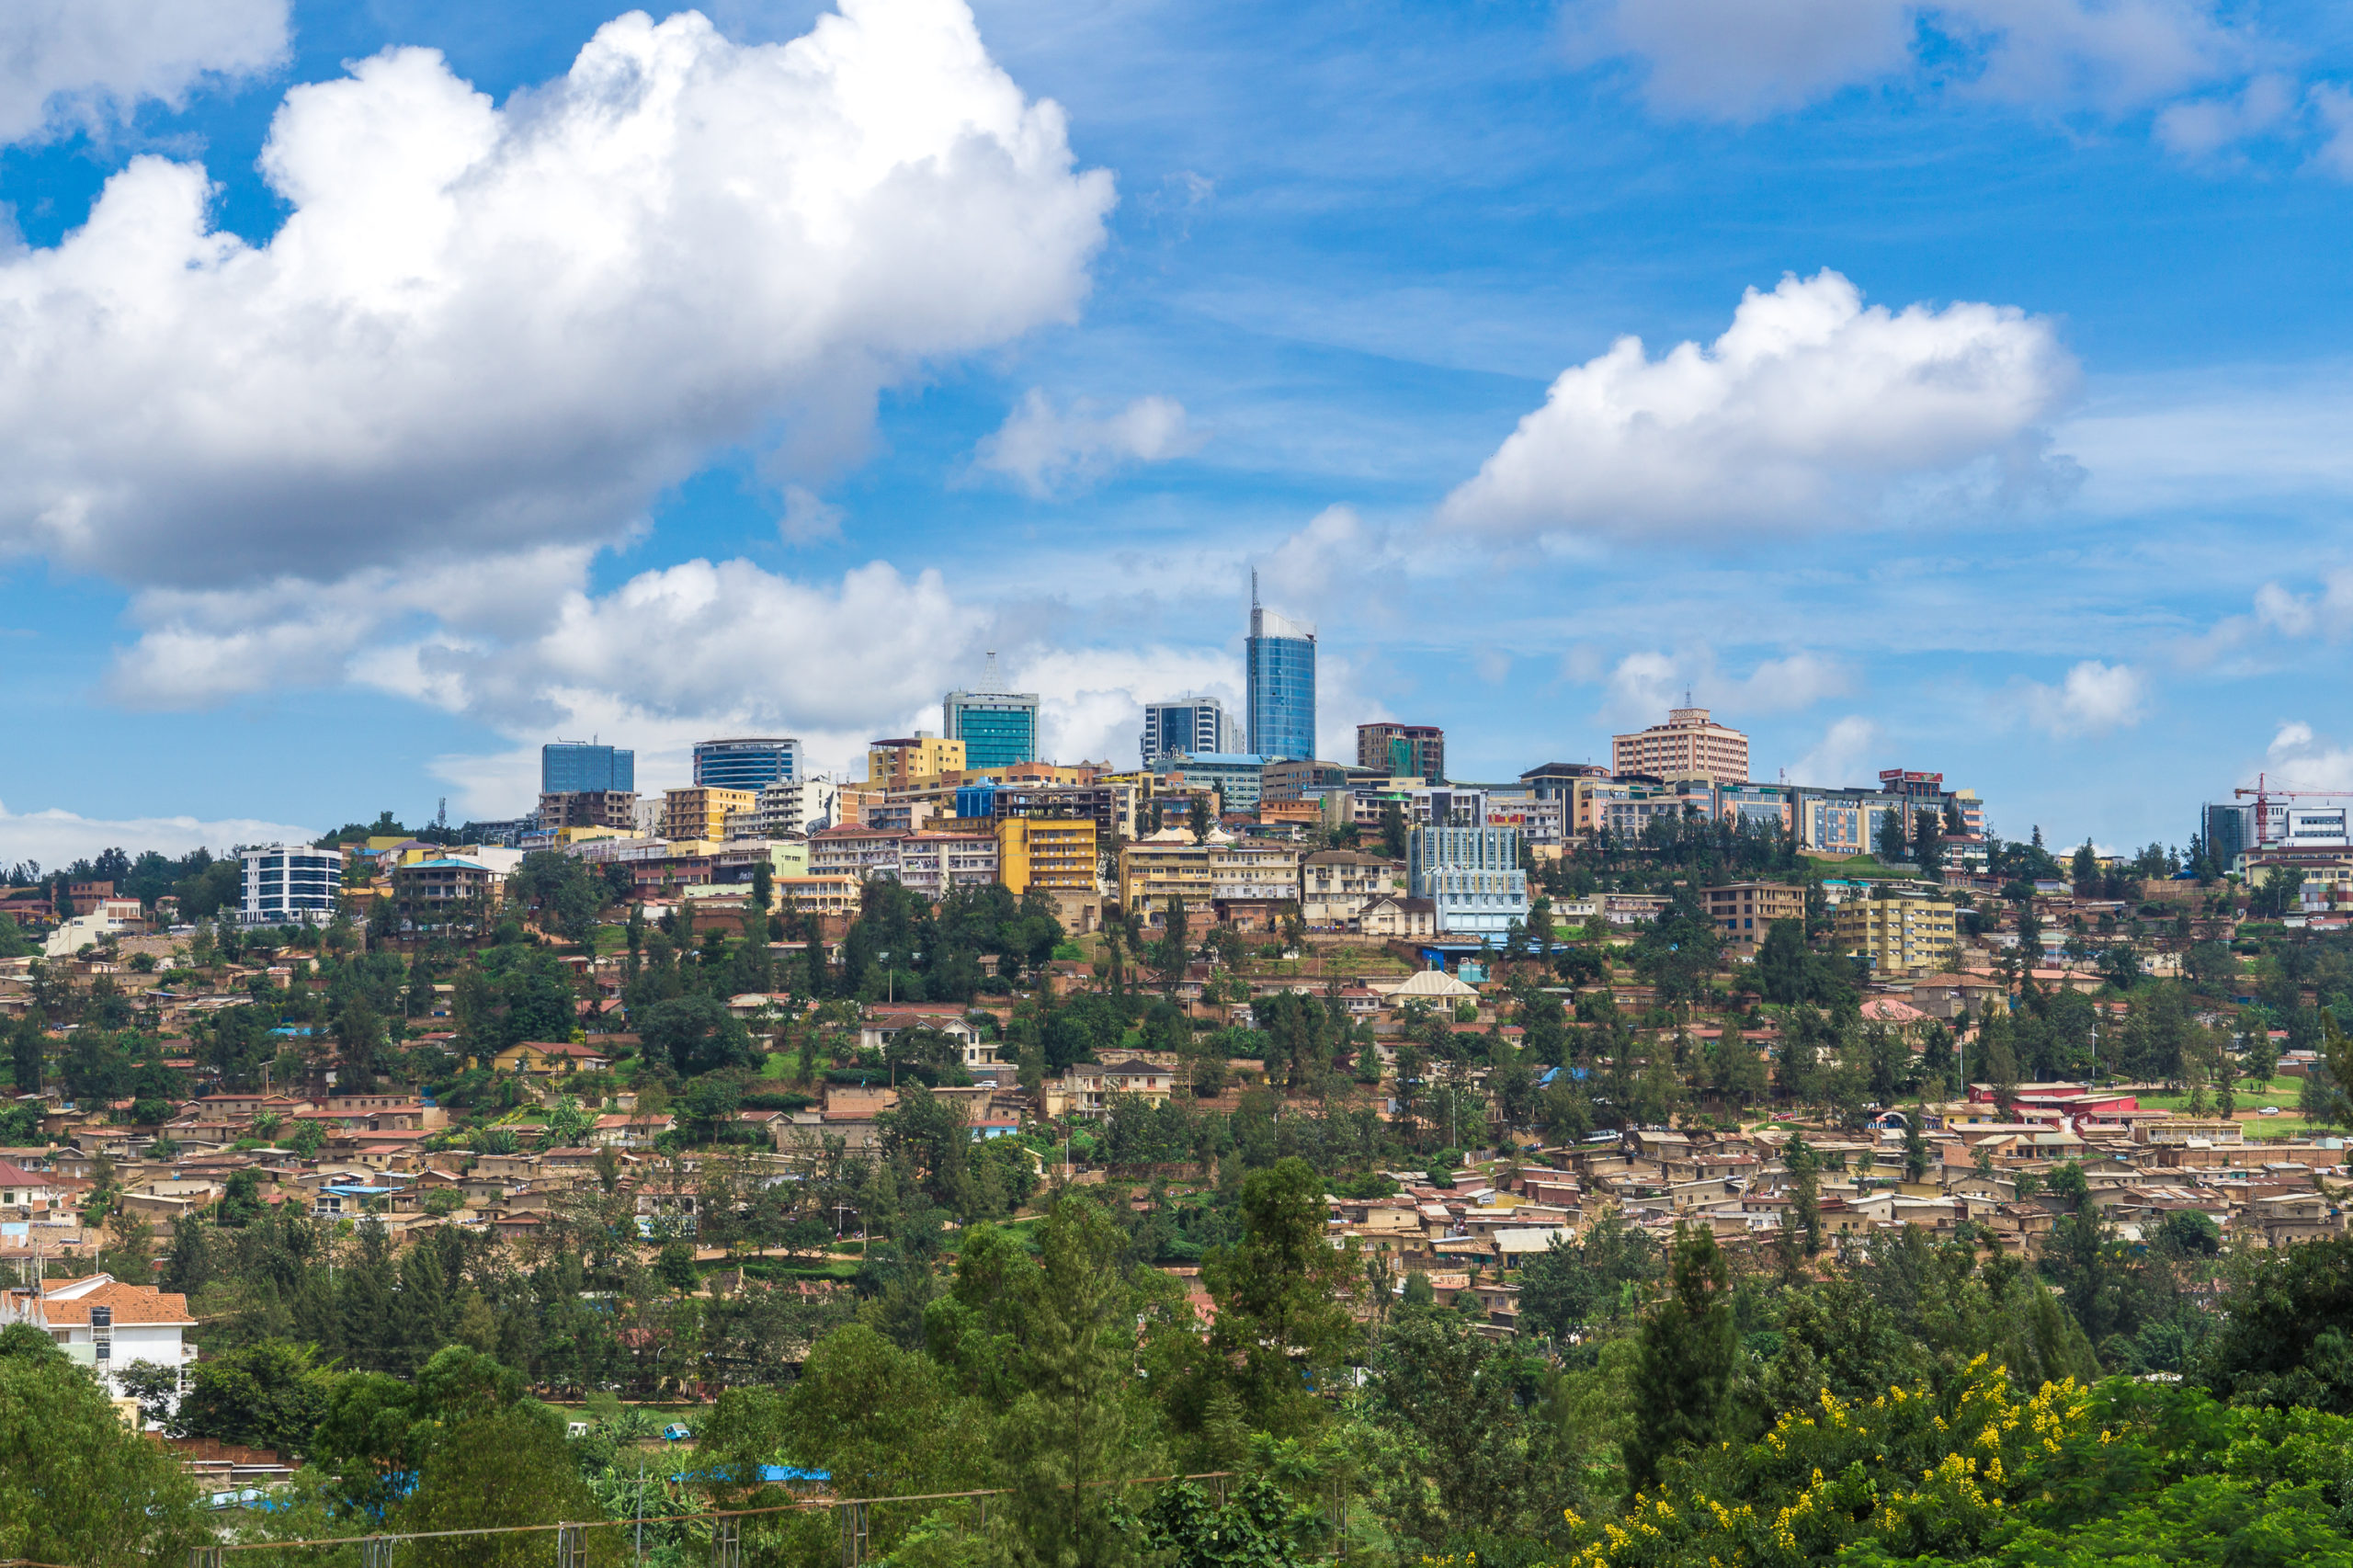 Hillside with buildings in Kigali